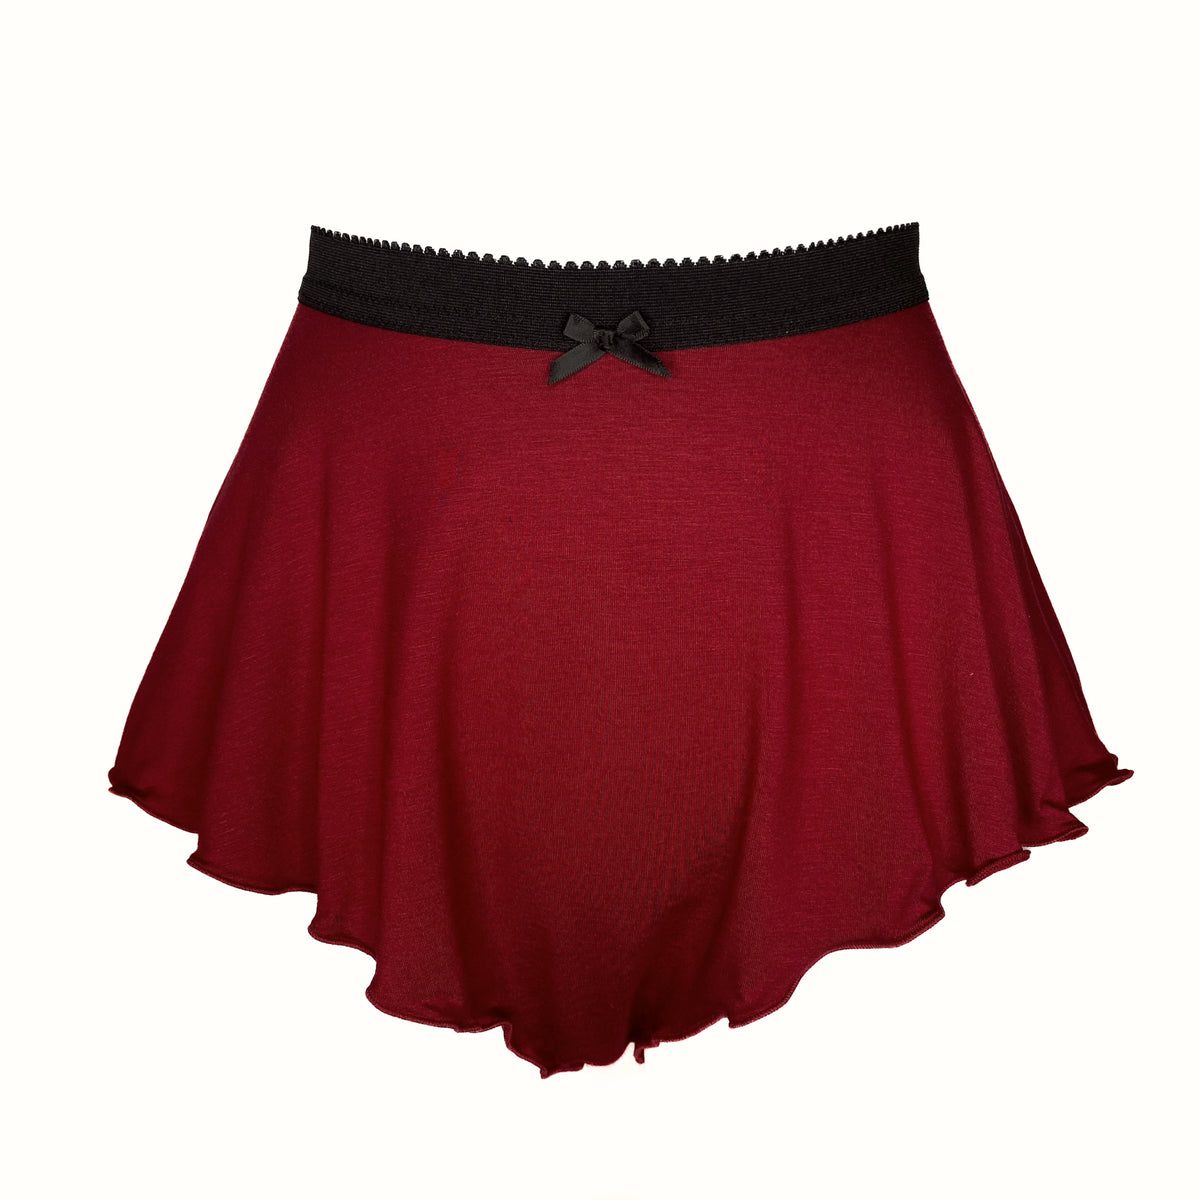 Tall French Knicker - Cherry Red Bamboo